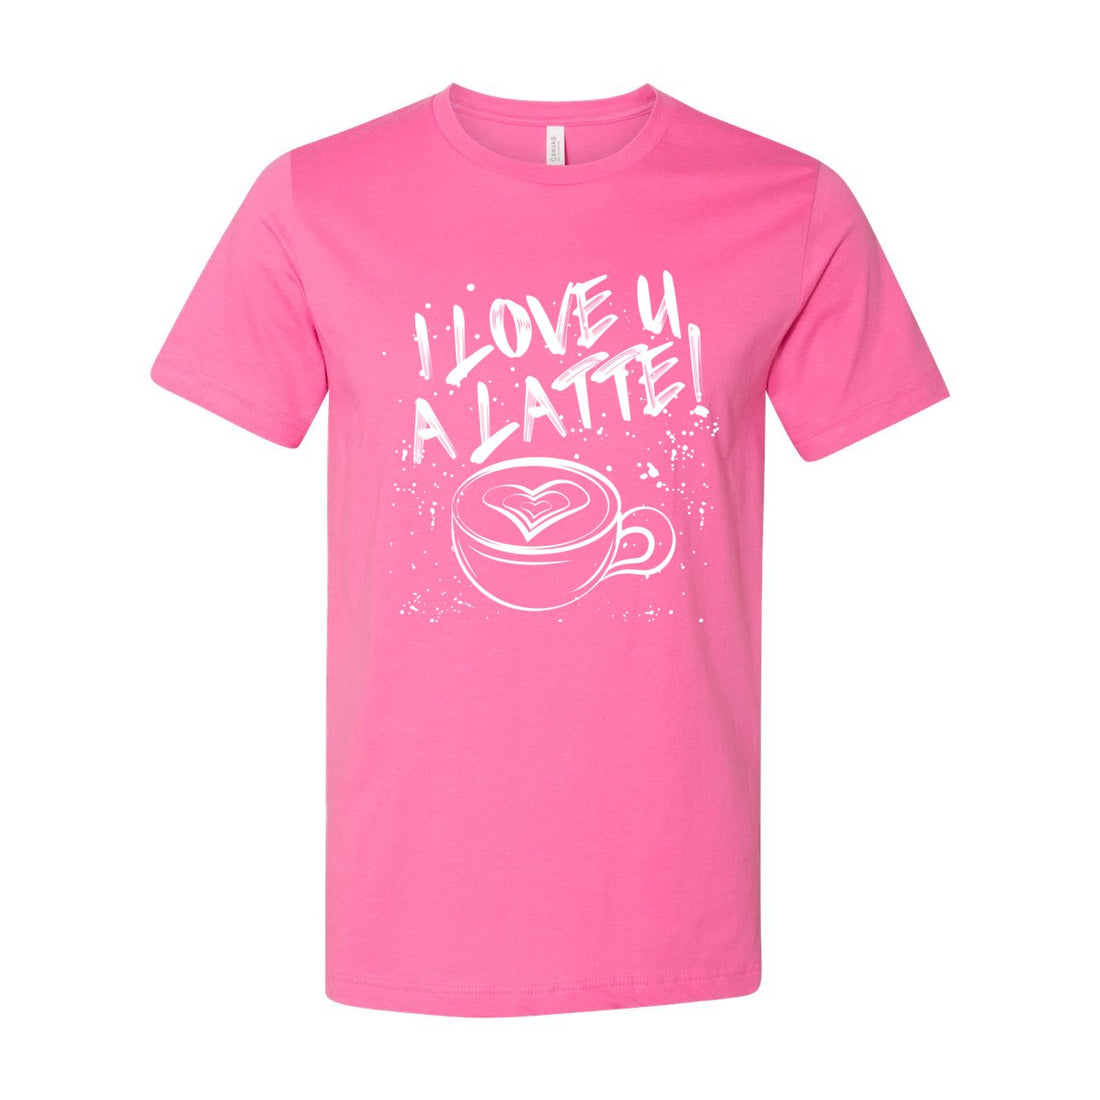 Love You A Latte Sleeve Jersey Tee - T-Shirts - Positively Sassy - Love You A Latte Sleeve Jersey Tee